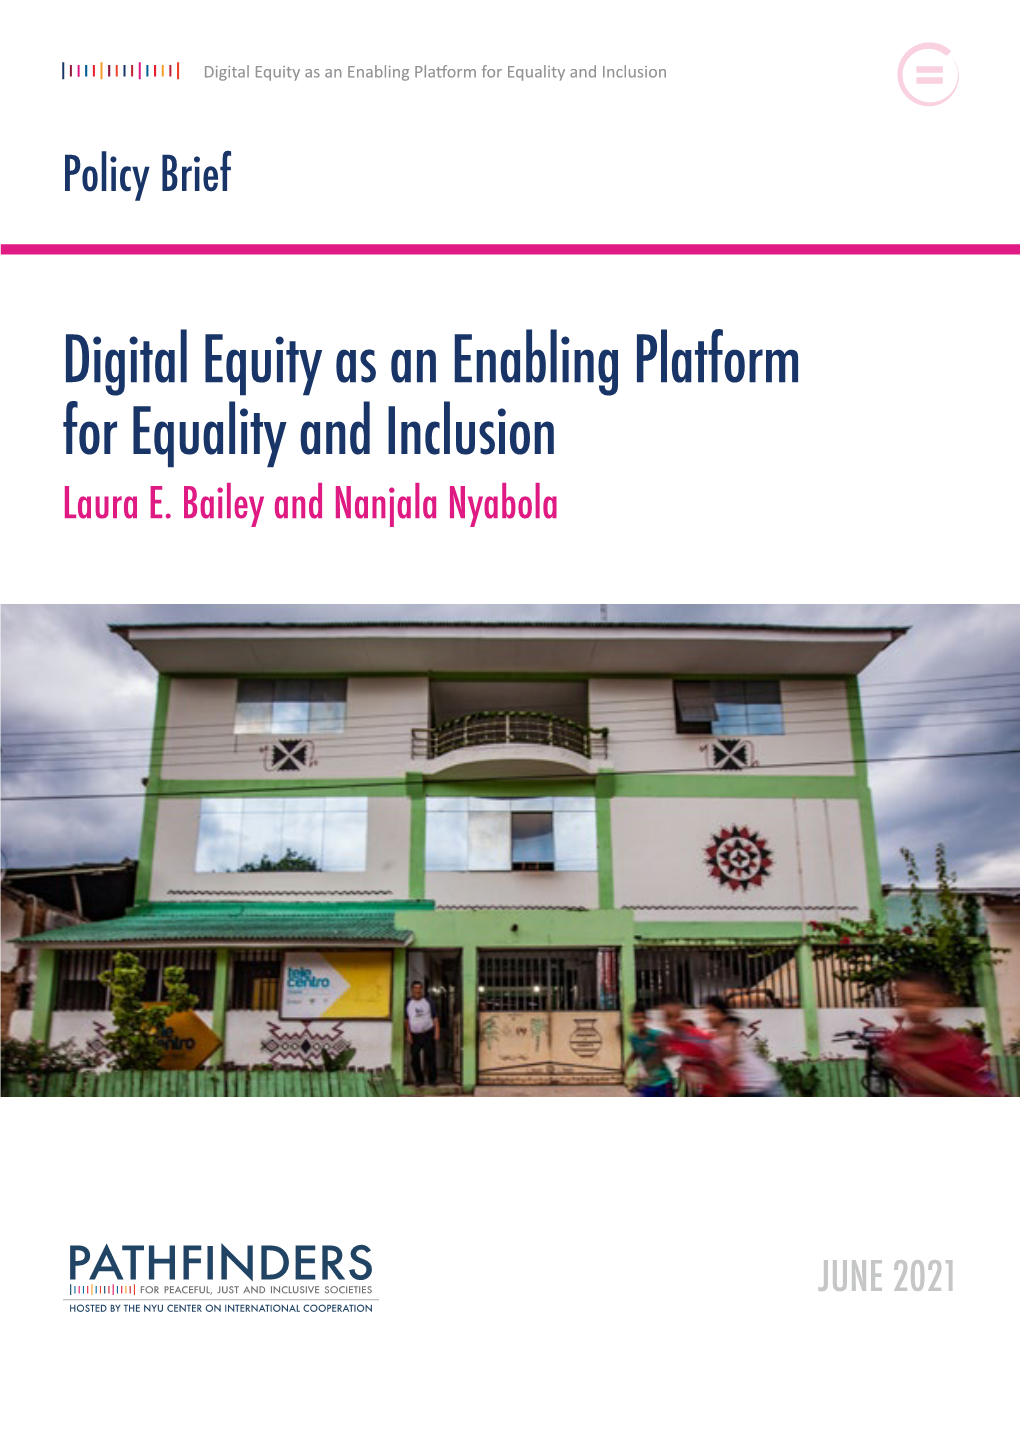 Digital Equity As an Enabling Platform for Equality and Inclusion